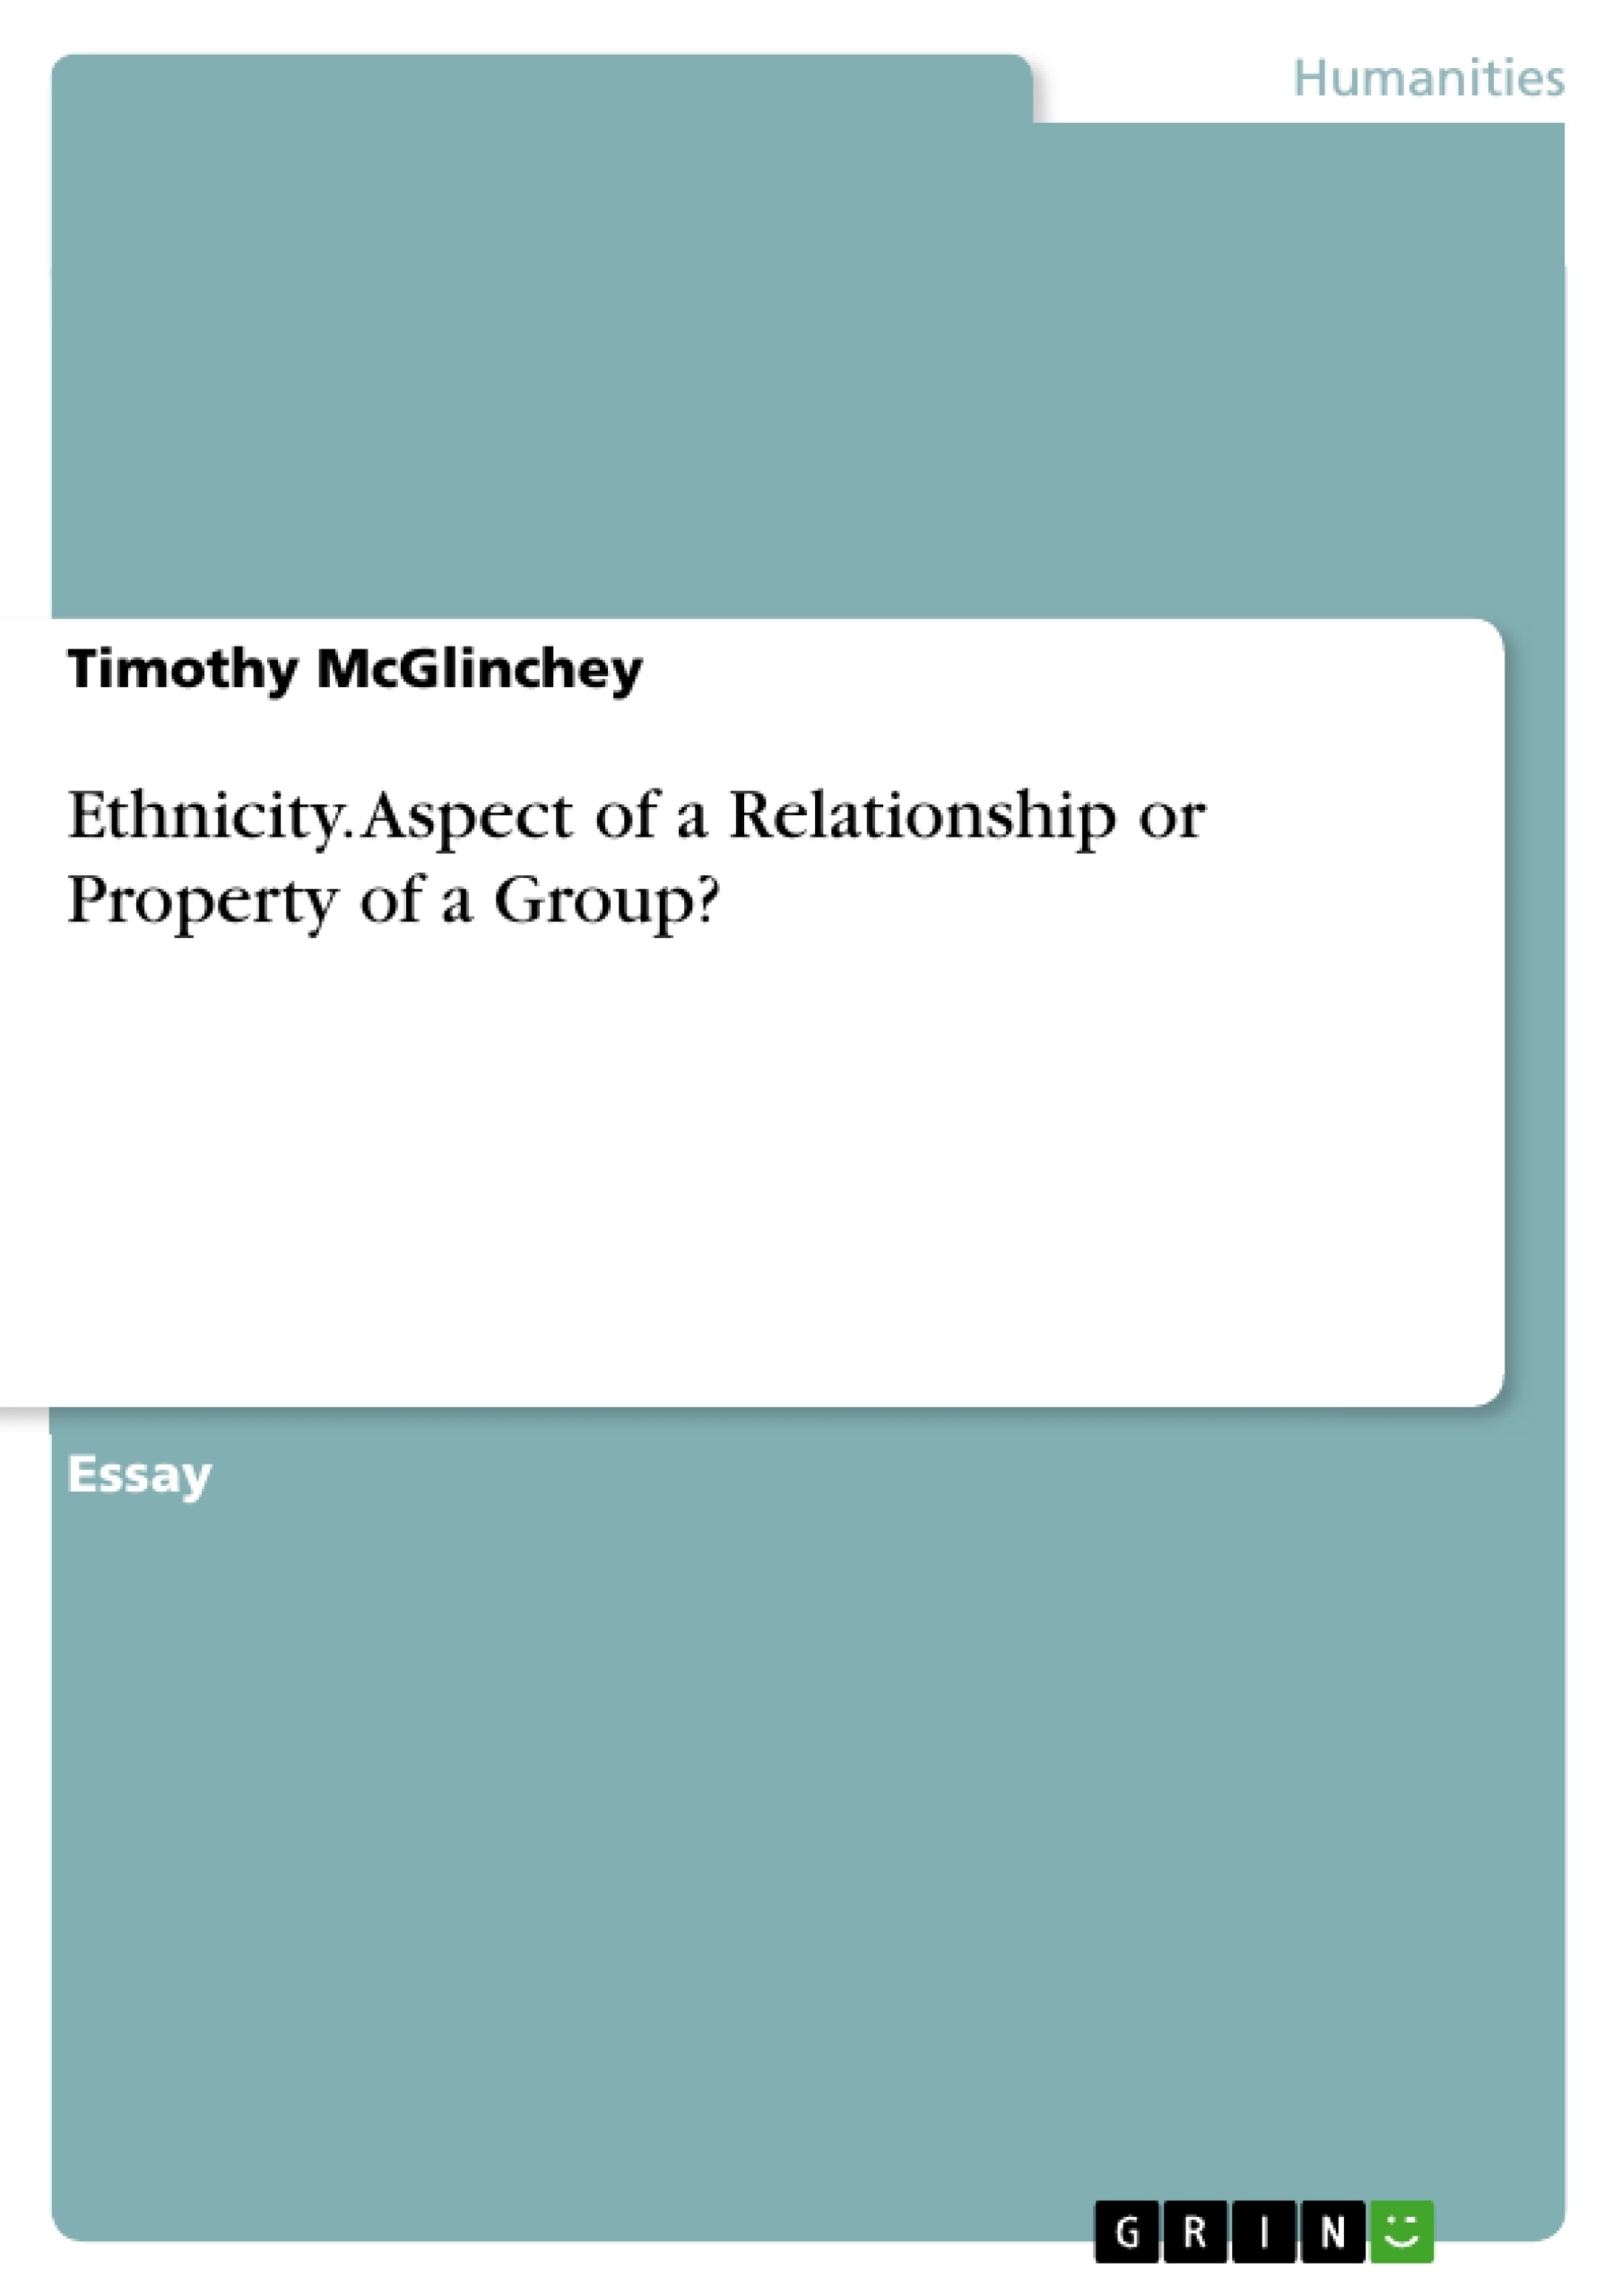 Titel: Ethnicity. Aspect of a Relationship or Property of a Group?